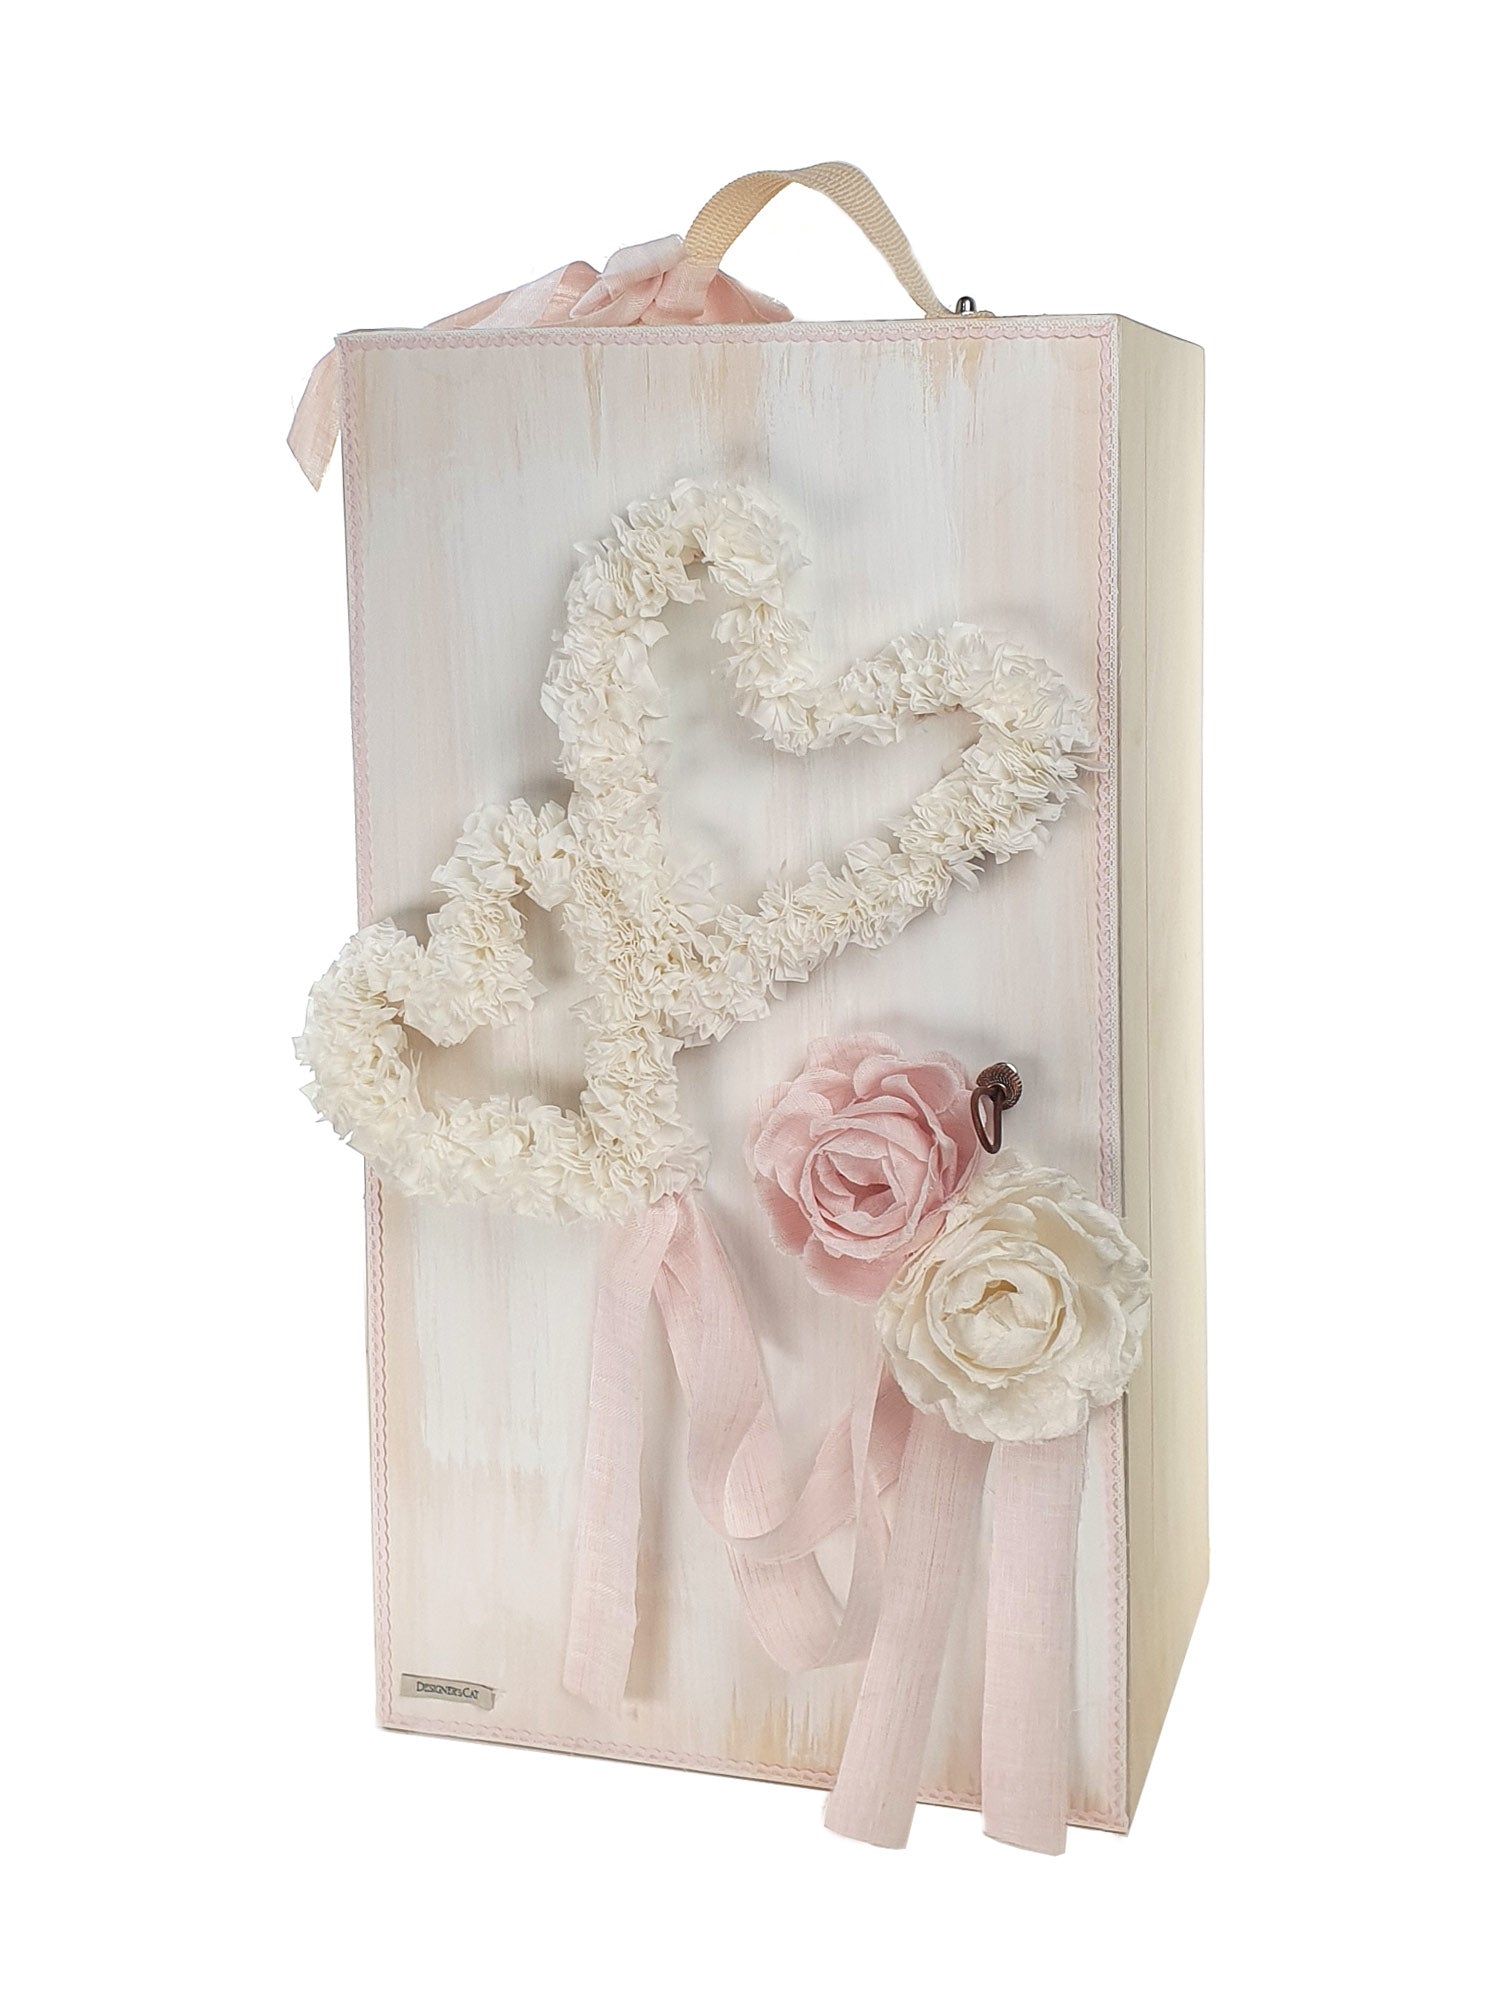 Baptism birch wood box with flowers - CHELSEA